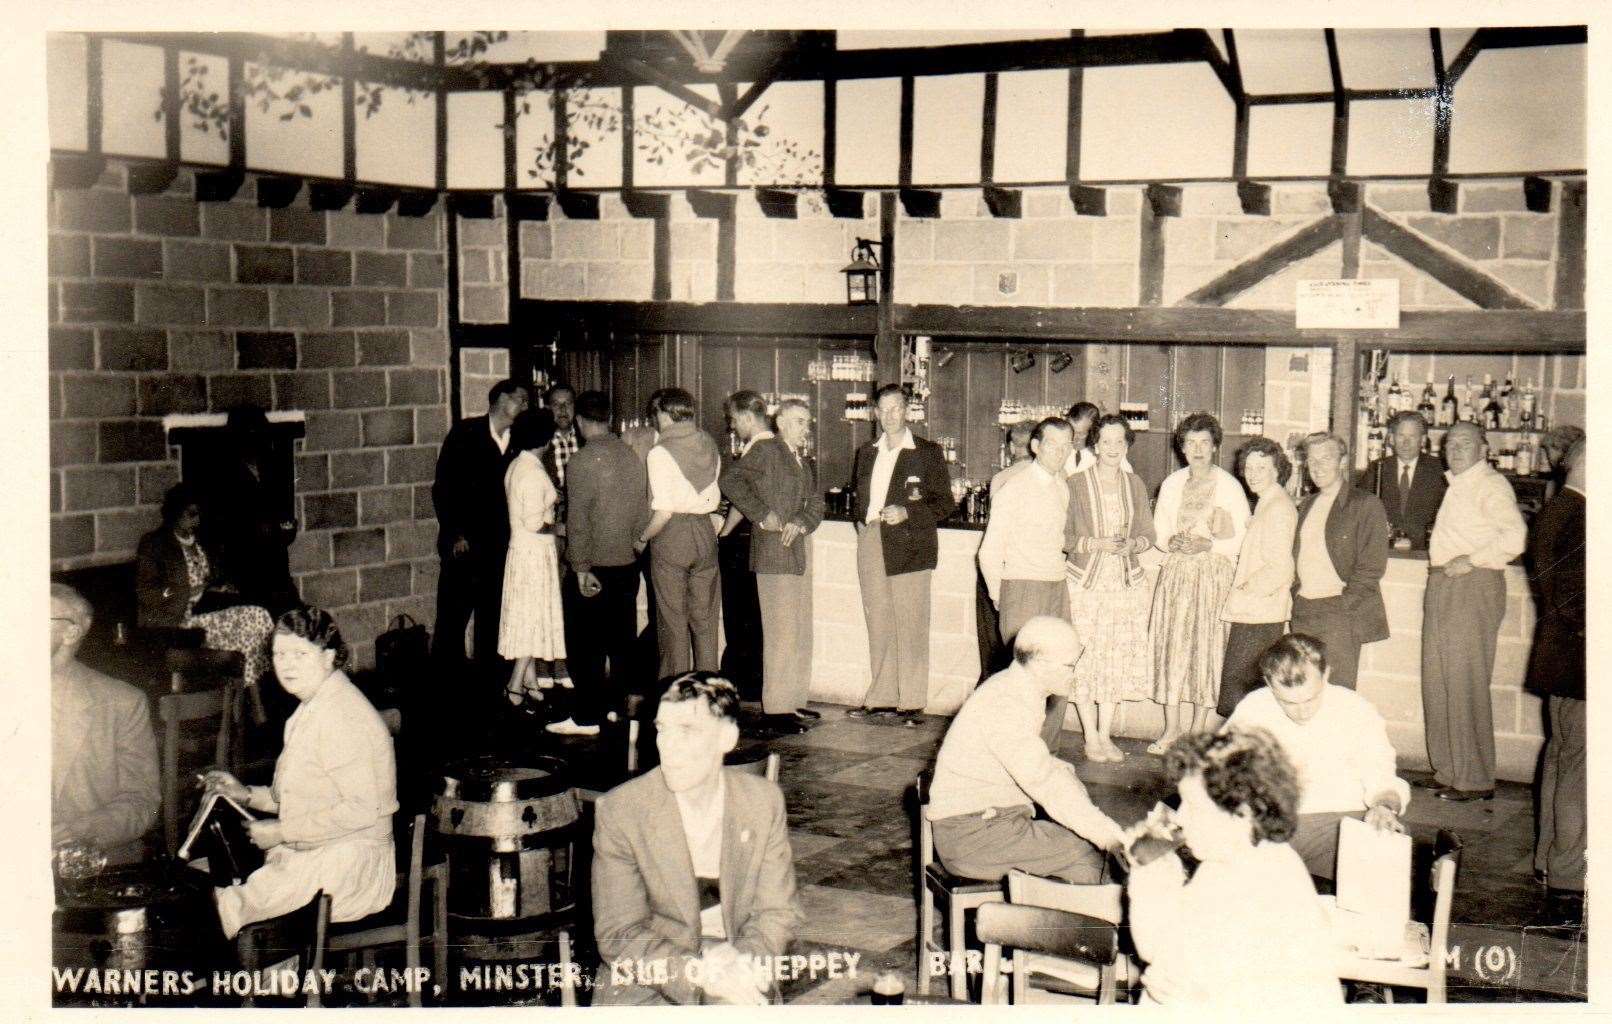 The bar at Warners holiday camp, Minster, Sheppey. Postcard in the Matthew and Hazel Bodiam Collection